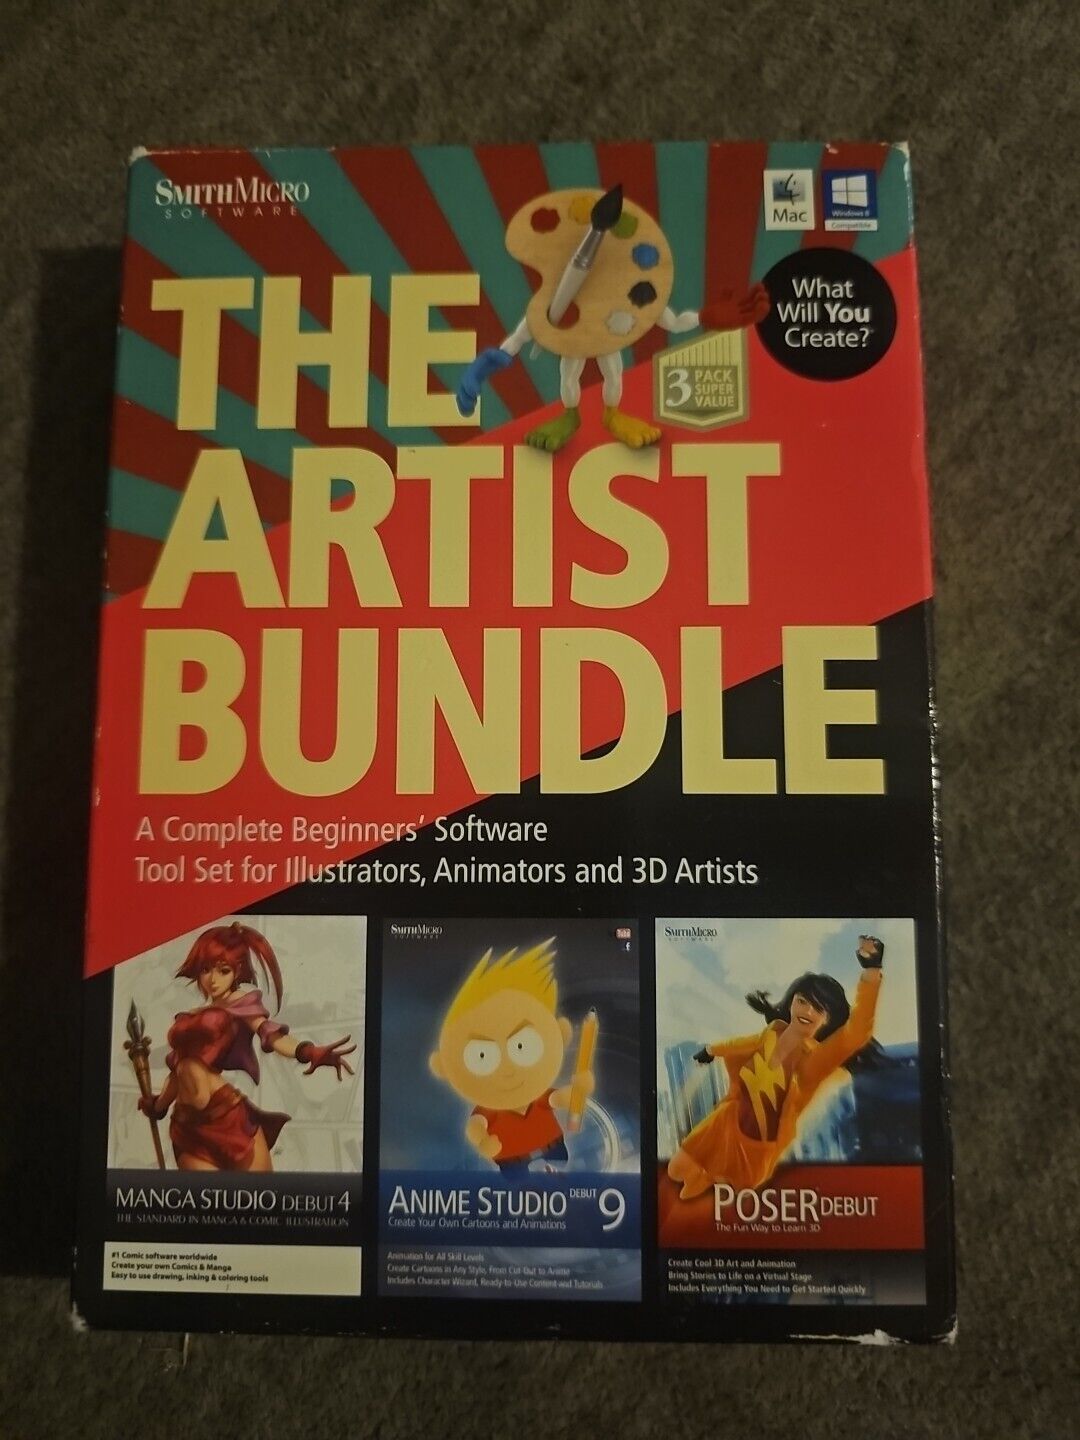  The Artist Bundle 3 Pack Super Value for Windows & Mac SmithMicro Software